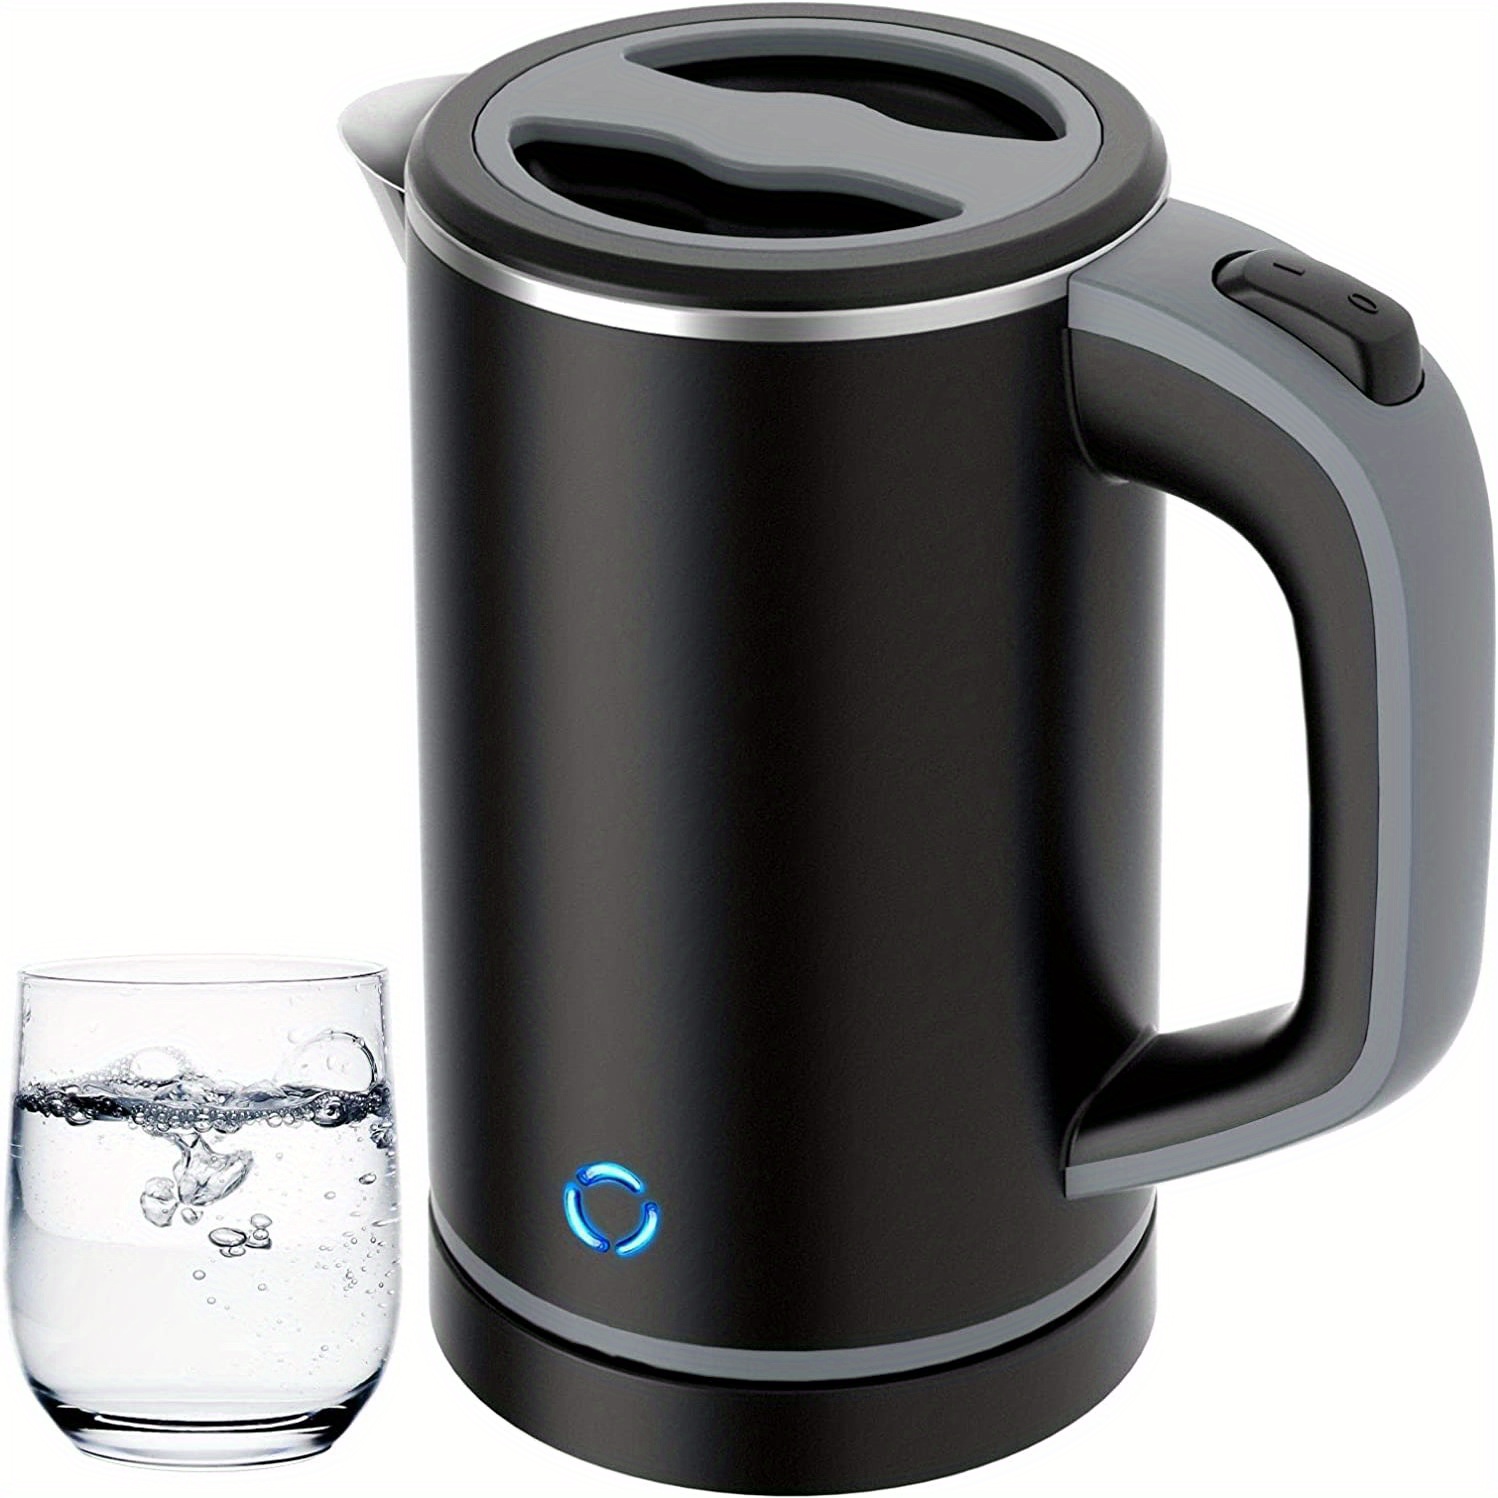  Portable Electric Kettles for Boiling Water, Travel